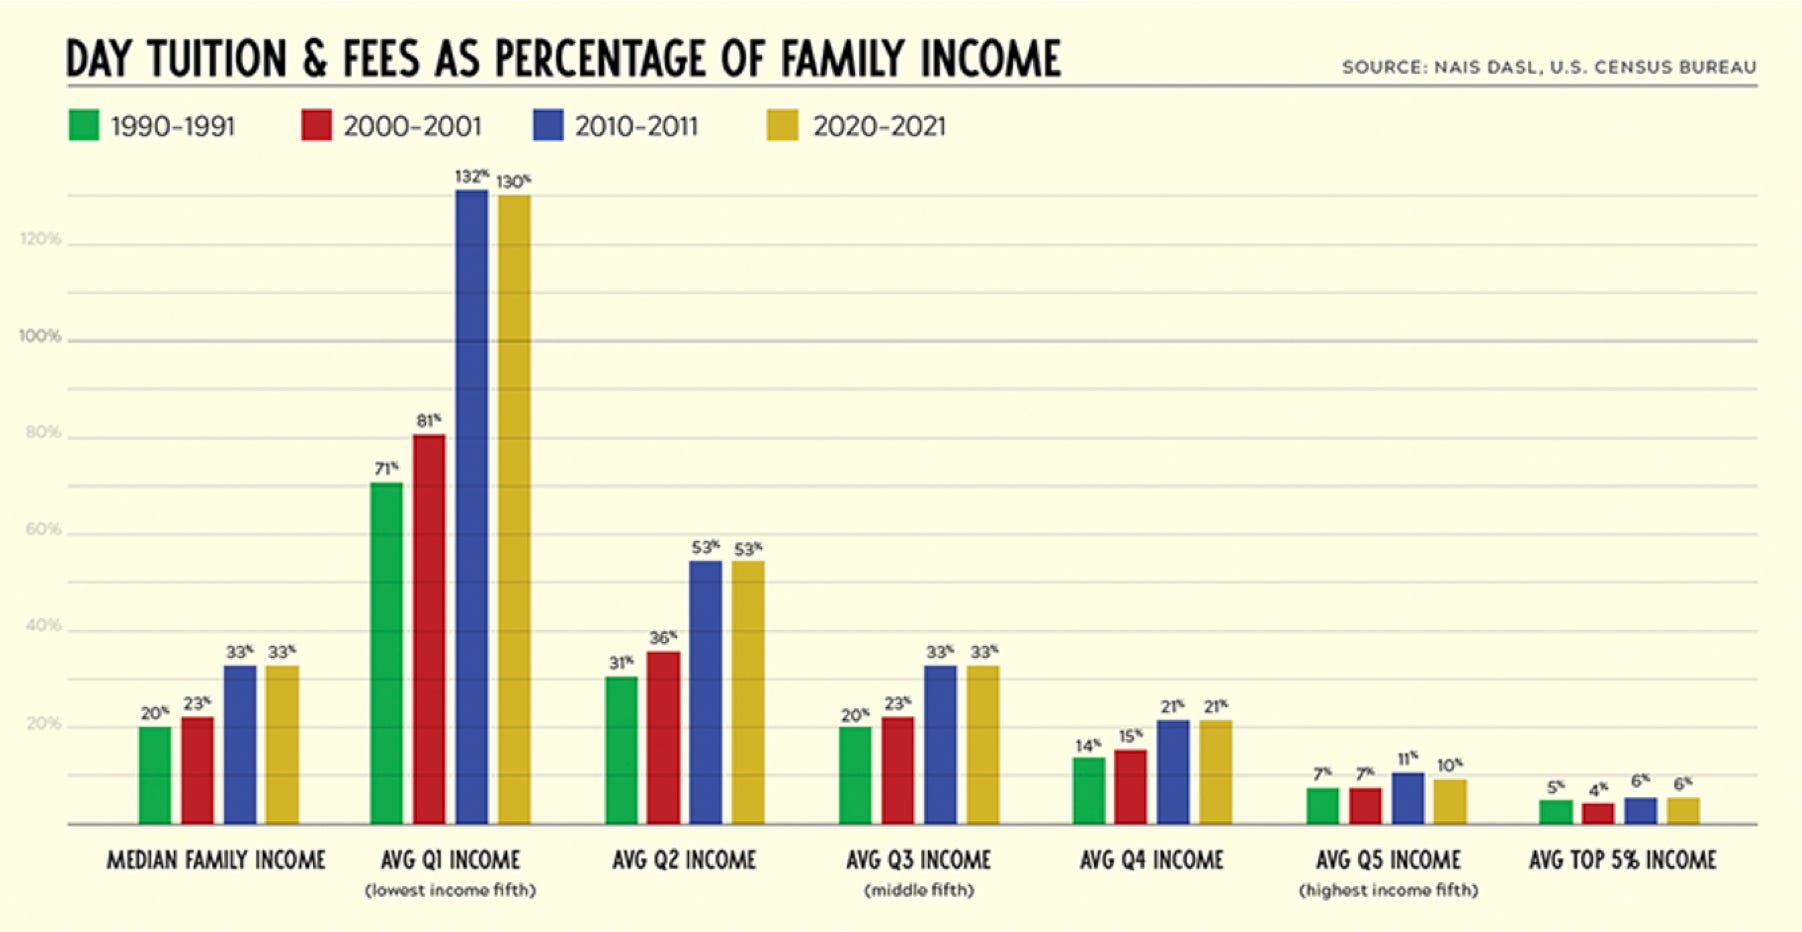 Day tuition fees as percentage of family income